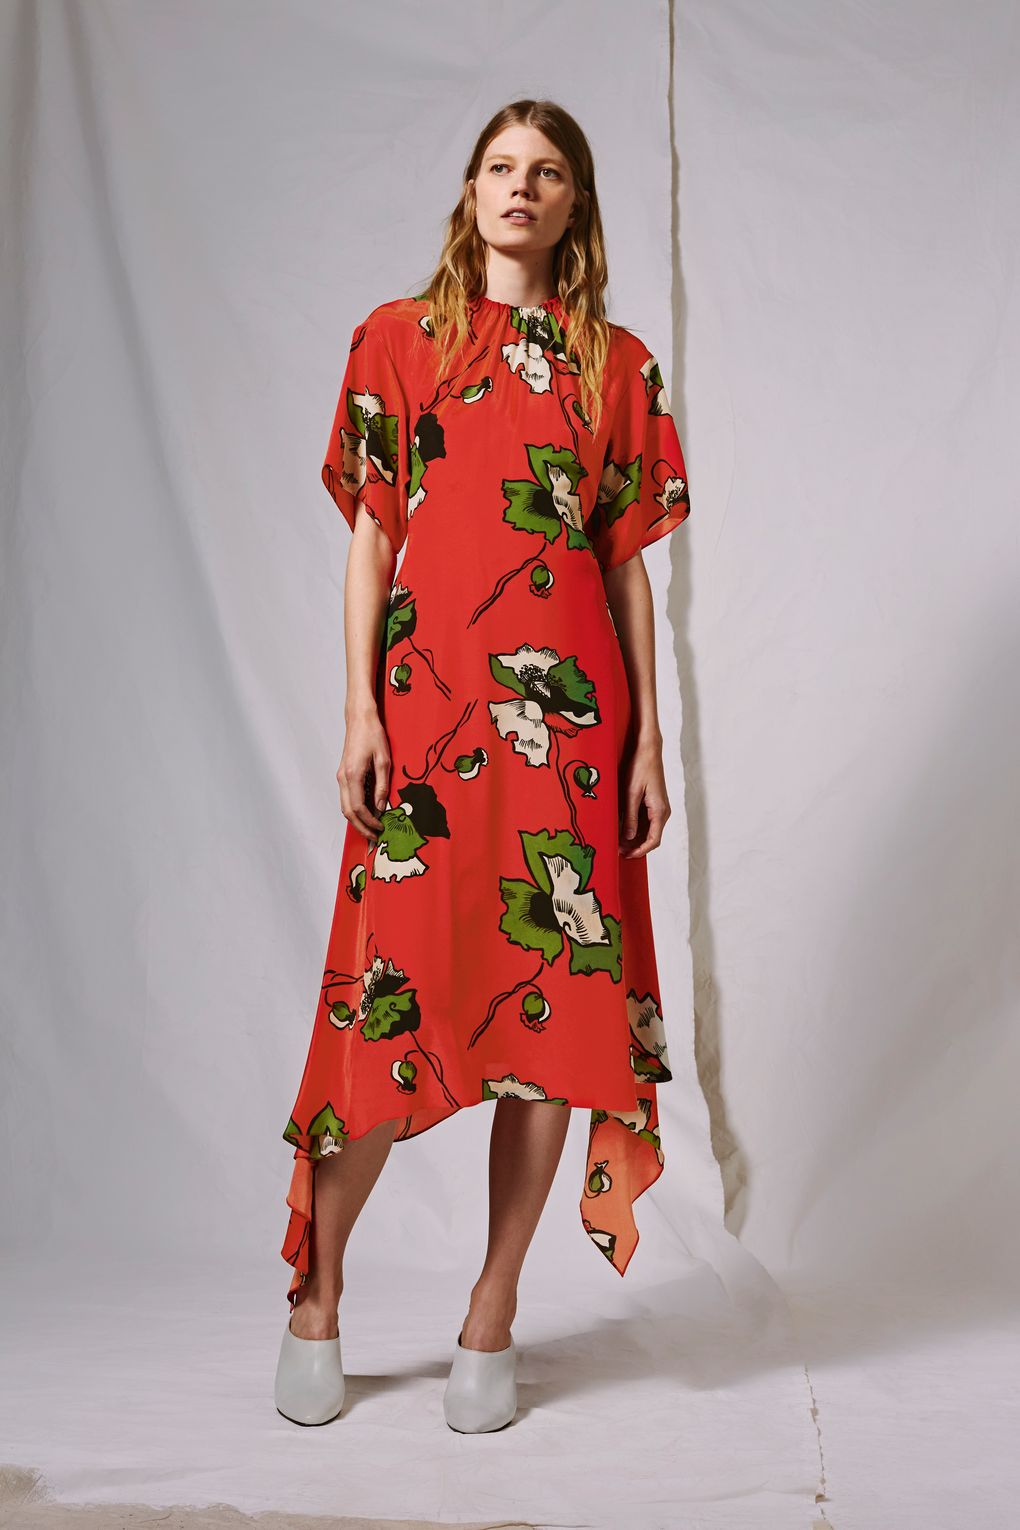 <a href=‘http://www.topshop.com/en/tsuk/product/new-in-this-week-2169932/new-in-fashion-6367514/silk-poppy-skater-dress-by-boutique-6910827?bi=0&ps=20‘ target=‘_blank‘ rel=‘noopener noreferrer‘>Topshop</a></p>